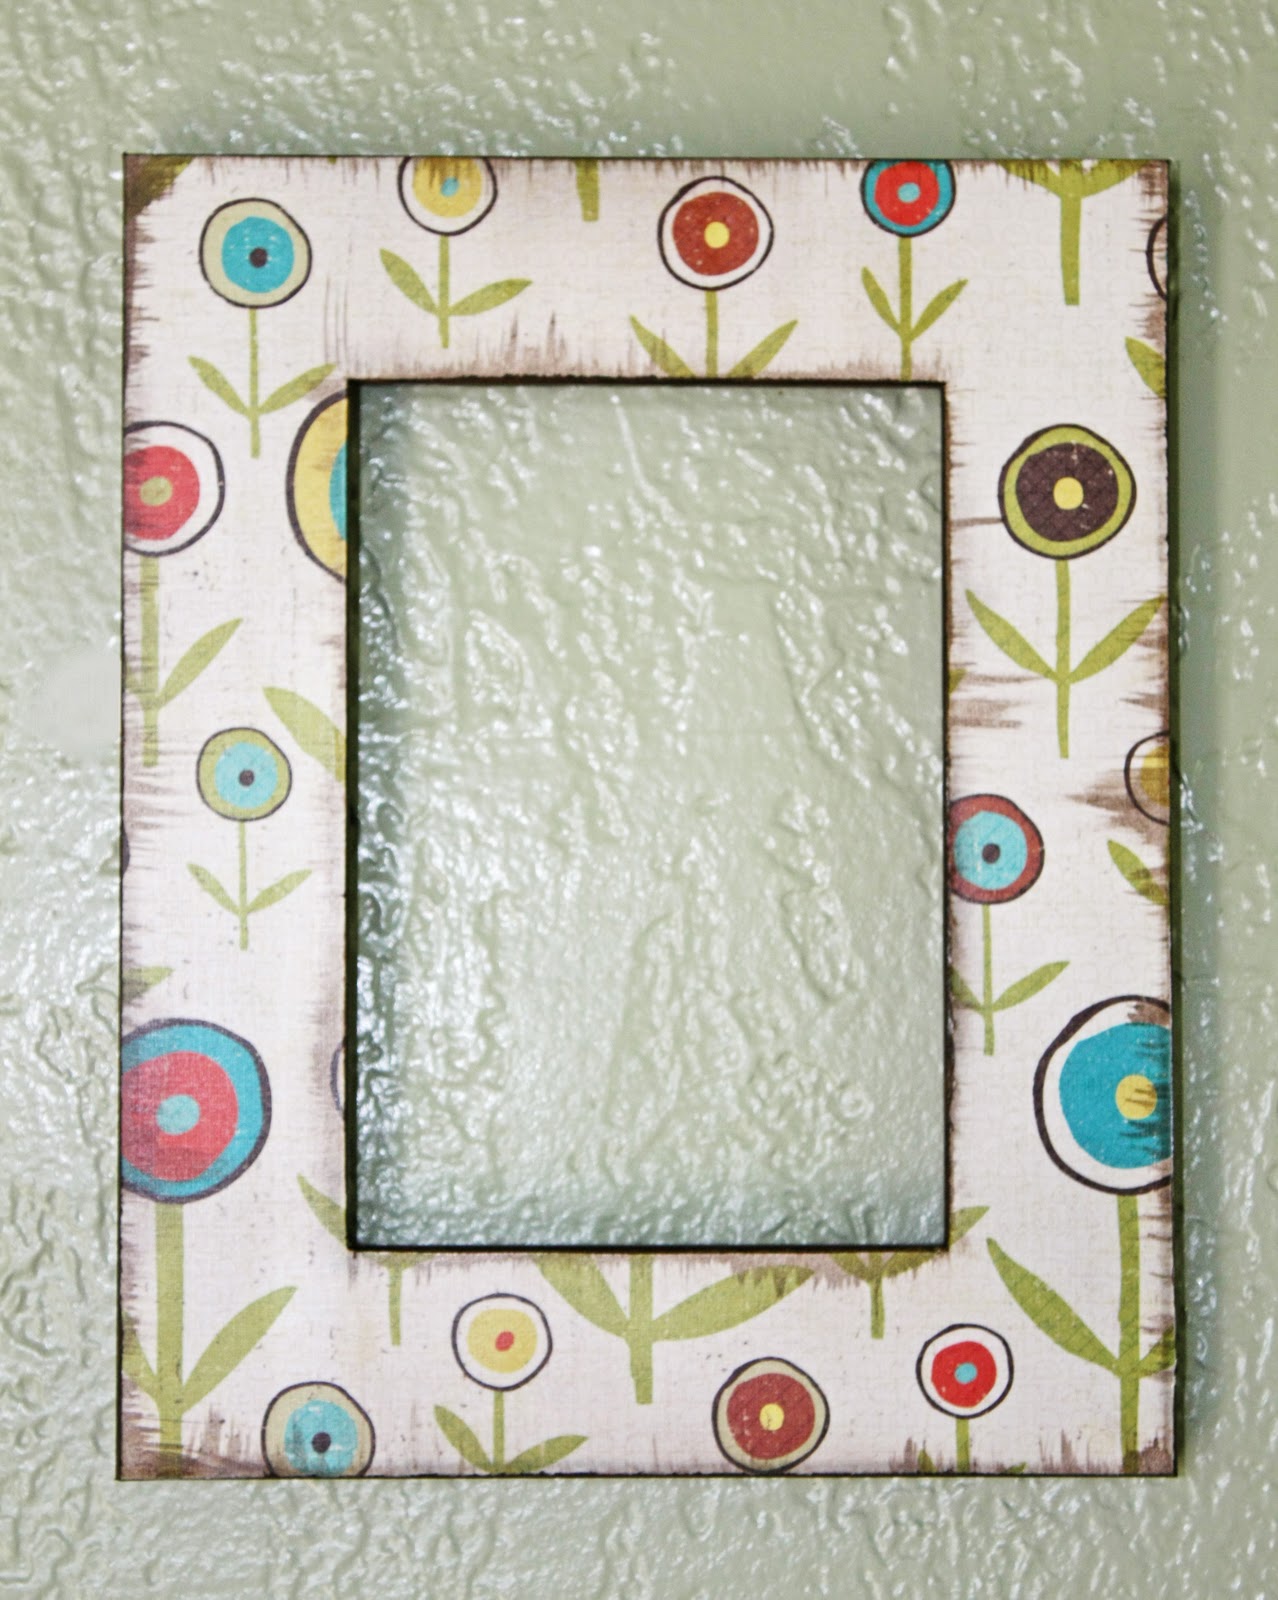 Using Paper To Decorate A Frame Stacy Risenmay intended for wooden picture frames to decorate for Your house